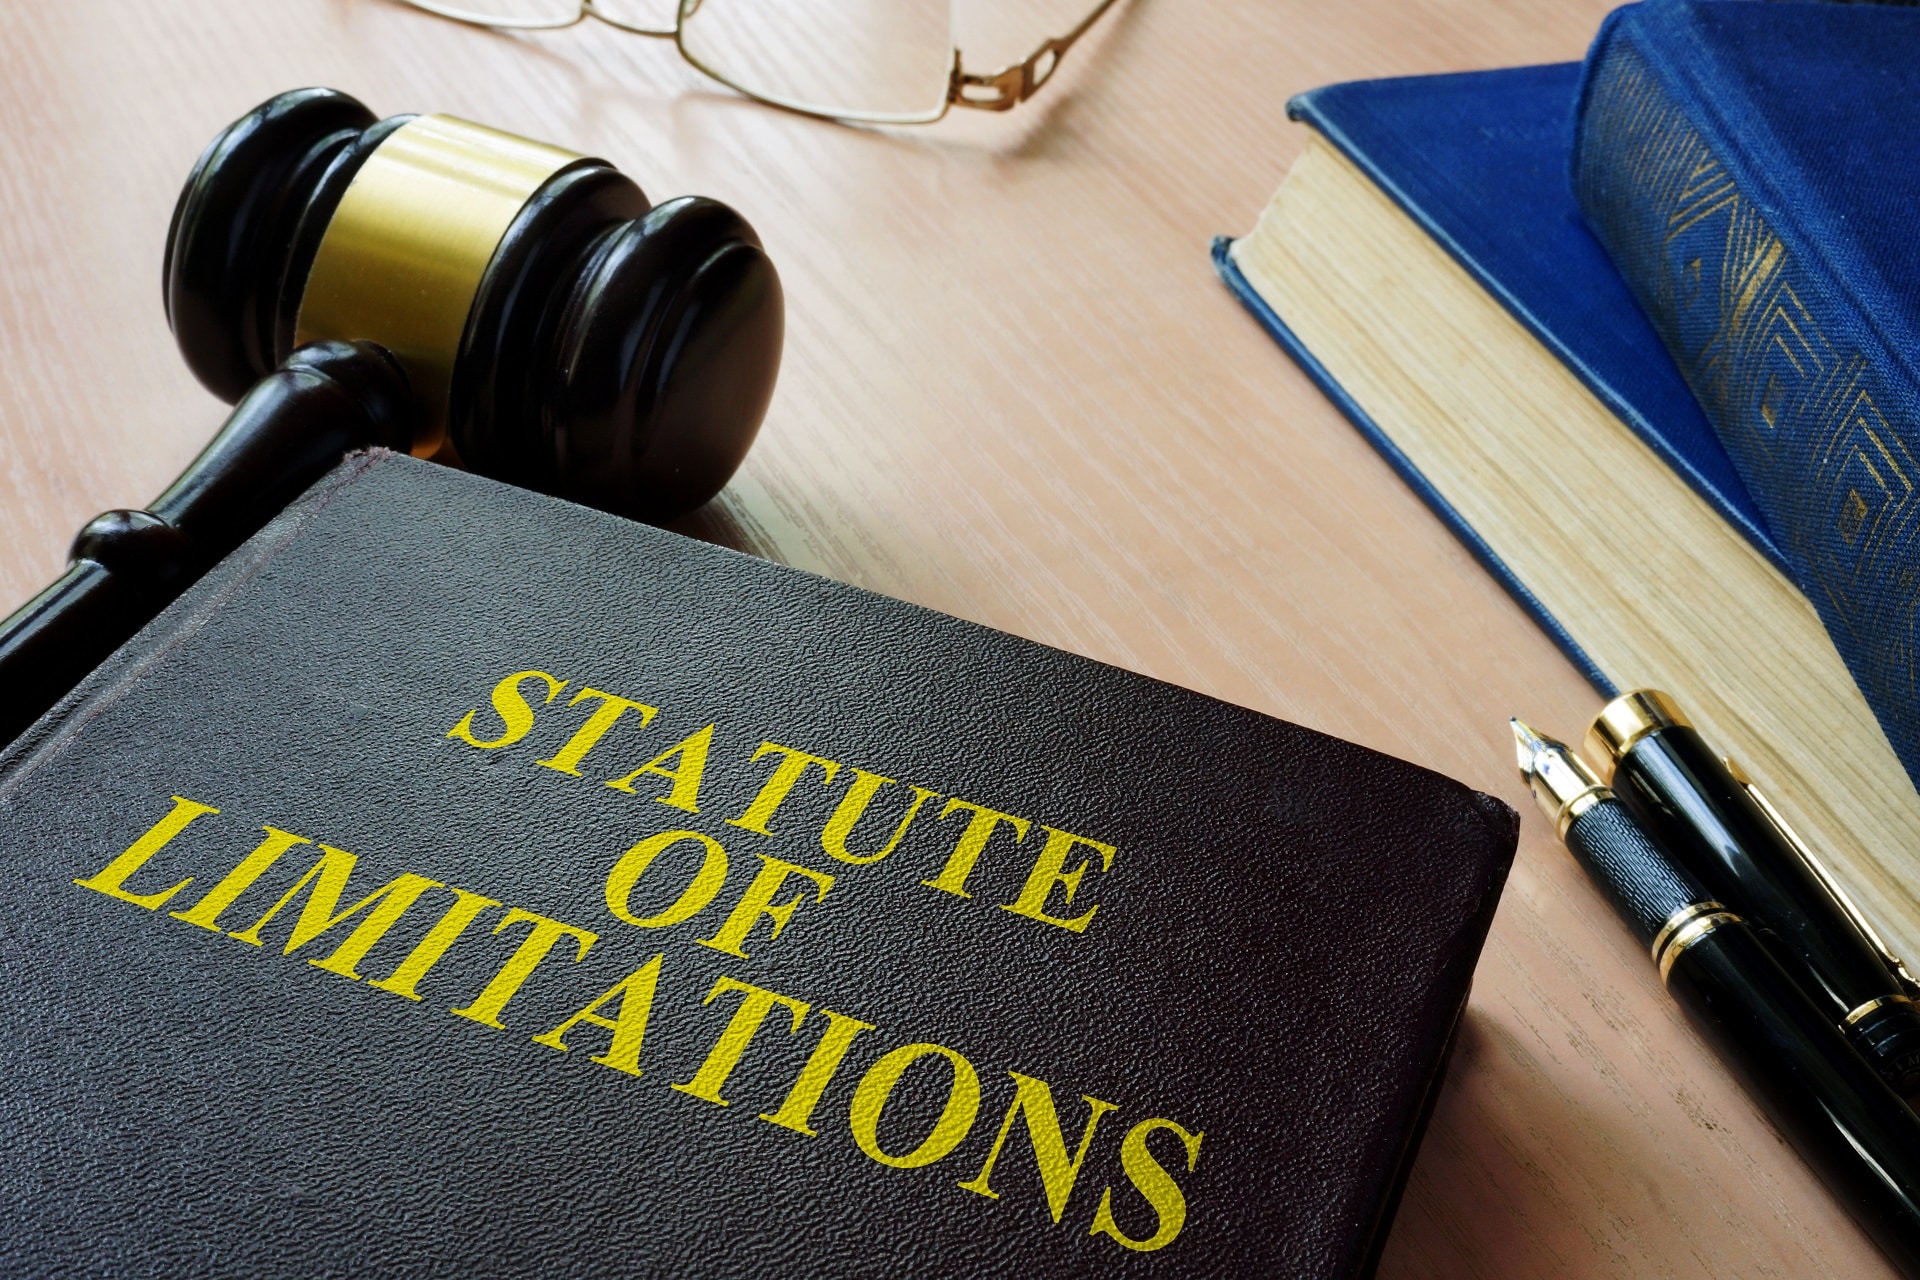 Statute of Limitations for Assault Crimes in Texas